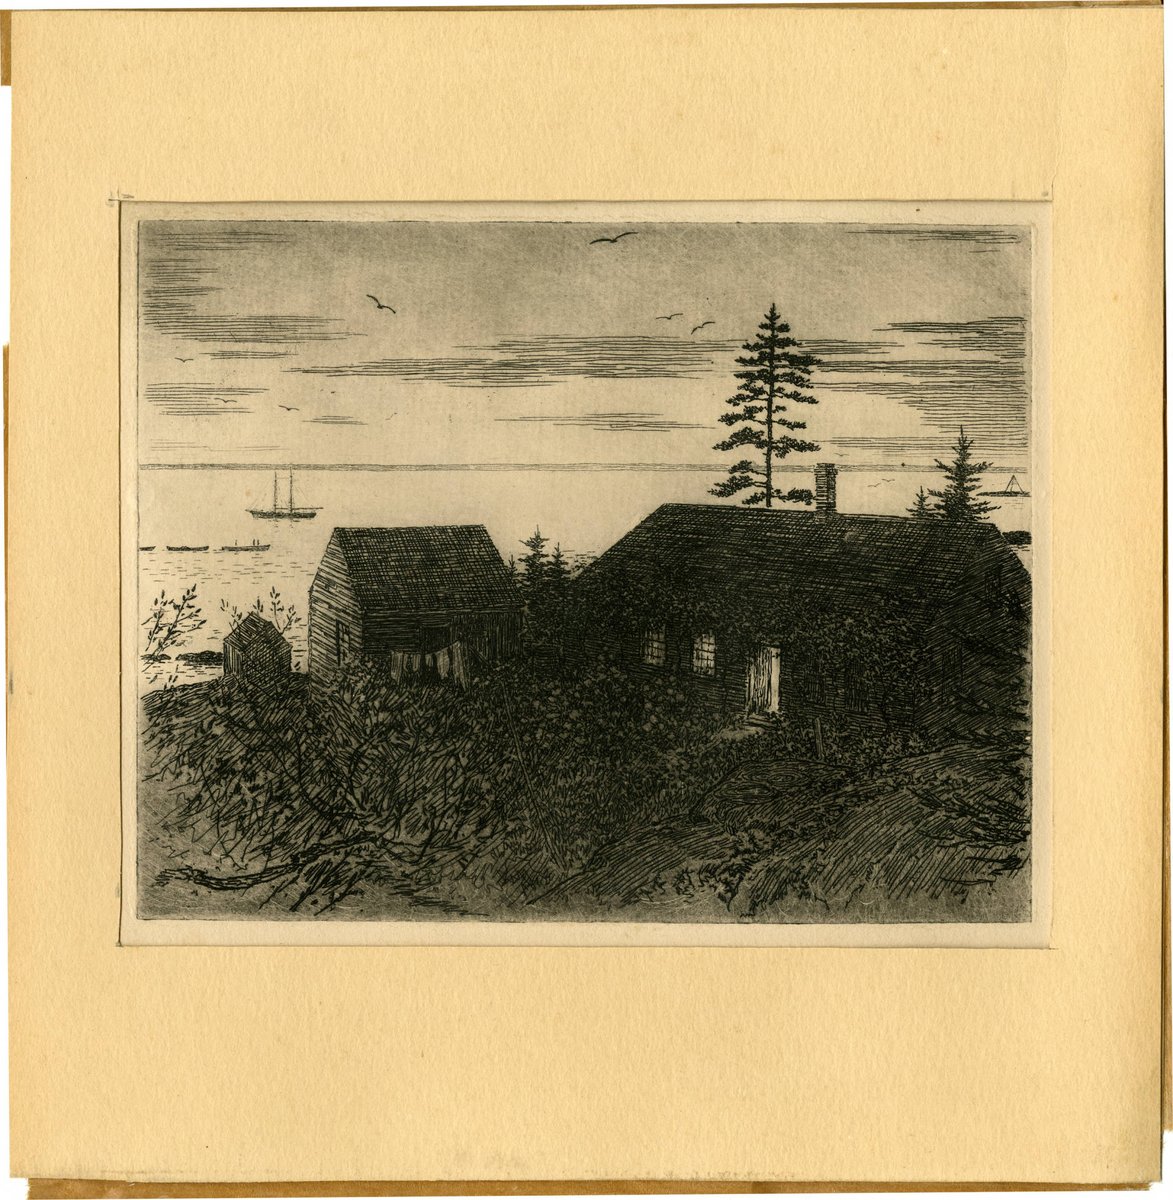 Steele gives us this landscape from  @SherlockUMN  @umnlib as a sign of hope, rooted in hard work that seeks our neighbor's good, of a faith that "is the assurance of things hoped for, the conviction of things not seen." We work in love against all ills.  http://purl.umn.edu/99621 